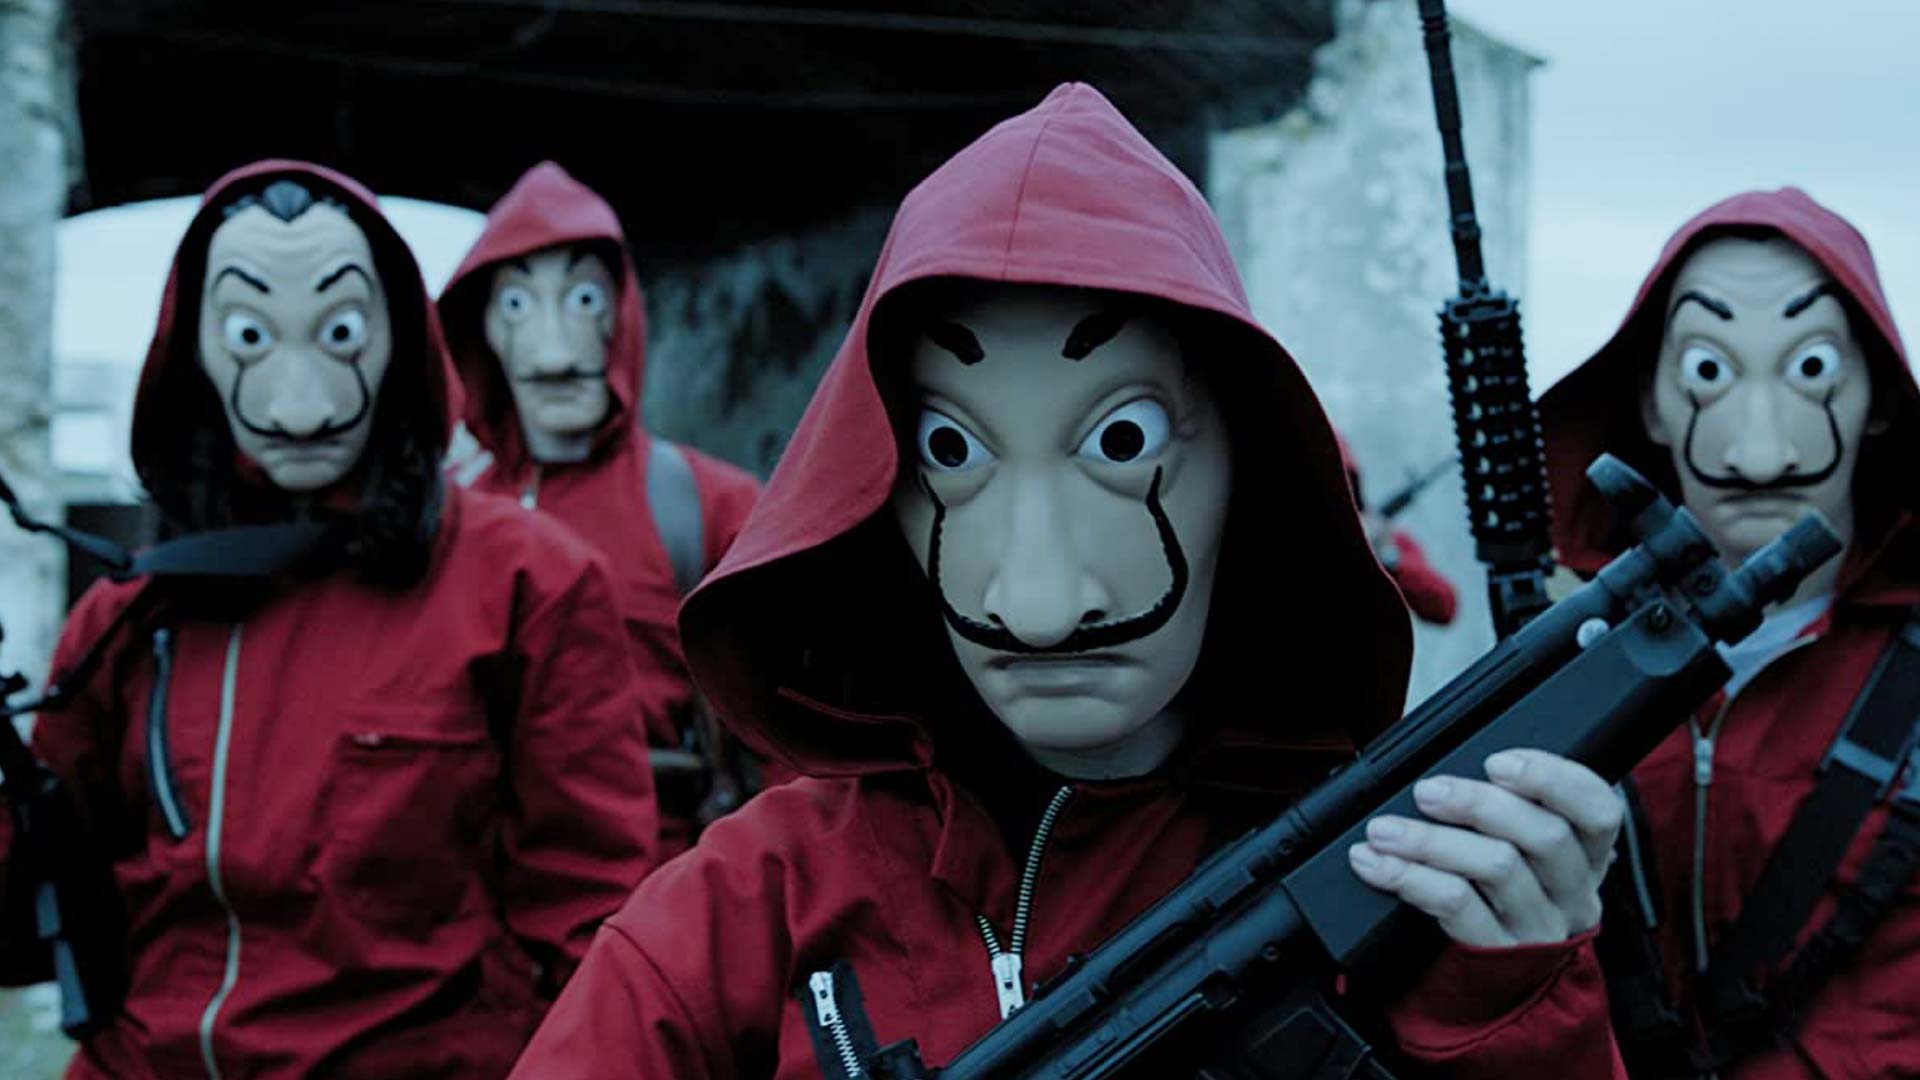 Money Heist season 5 to You season new seasons of Netflix shows confirmed for a 2021 release